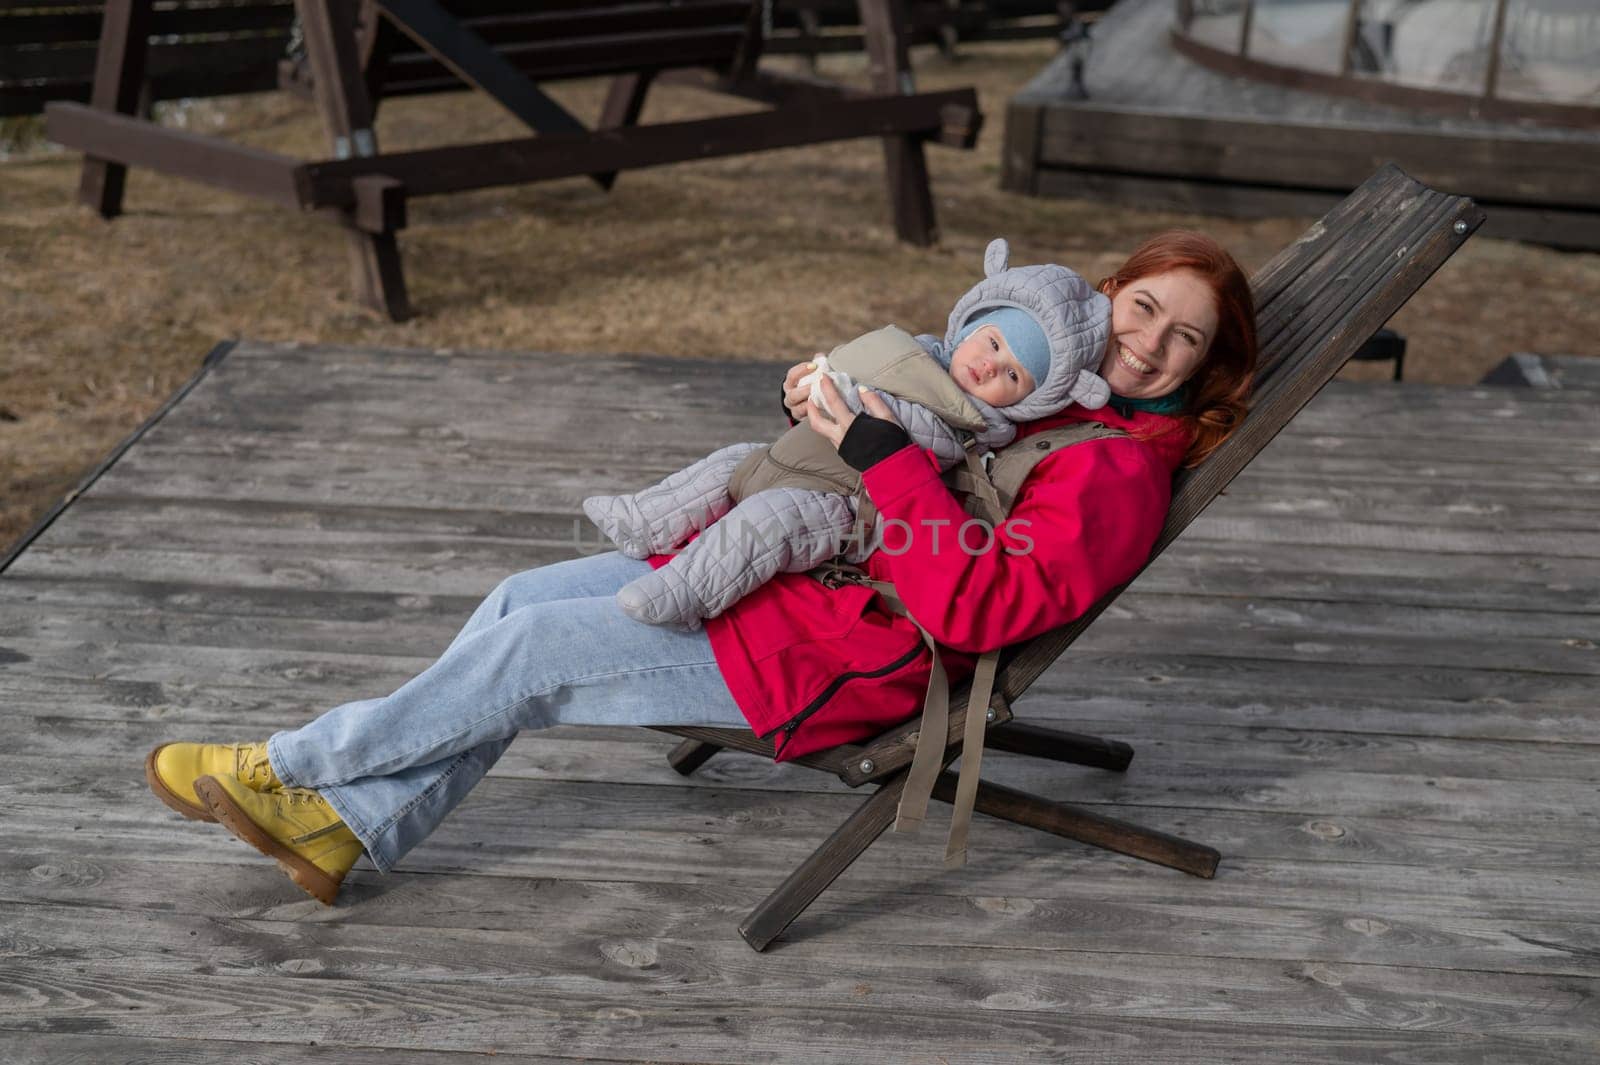 Caucasian woman with her son in an ergo backpack sitting in a wooden deck chair. by mrwed54